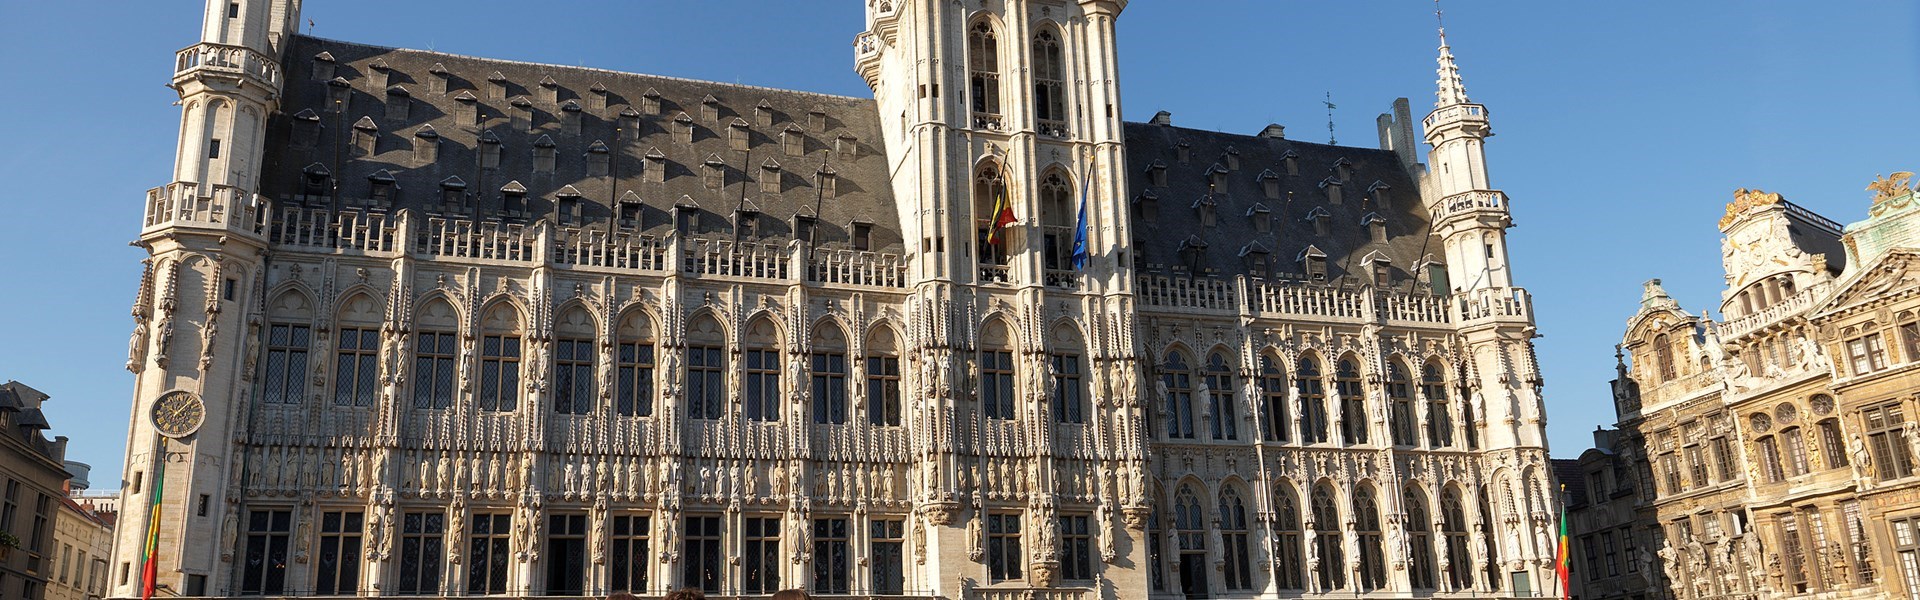 Town Hall on Grand Place, Brussels 